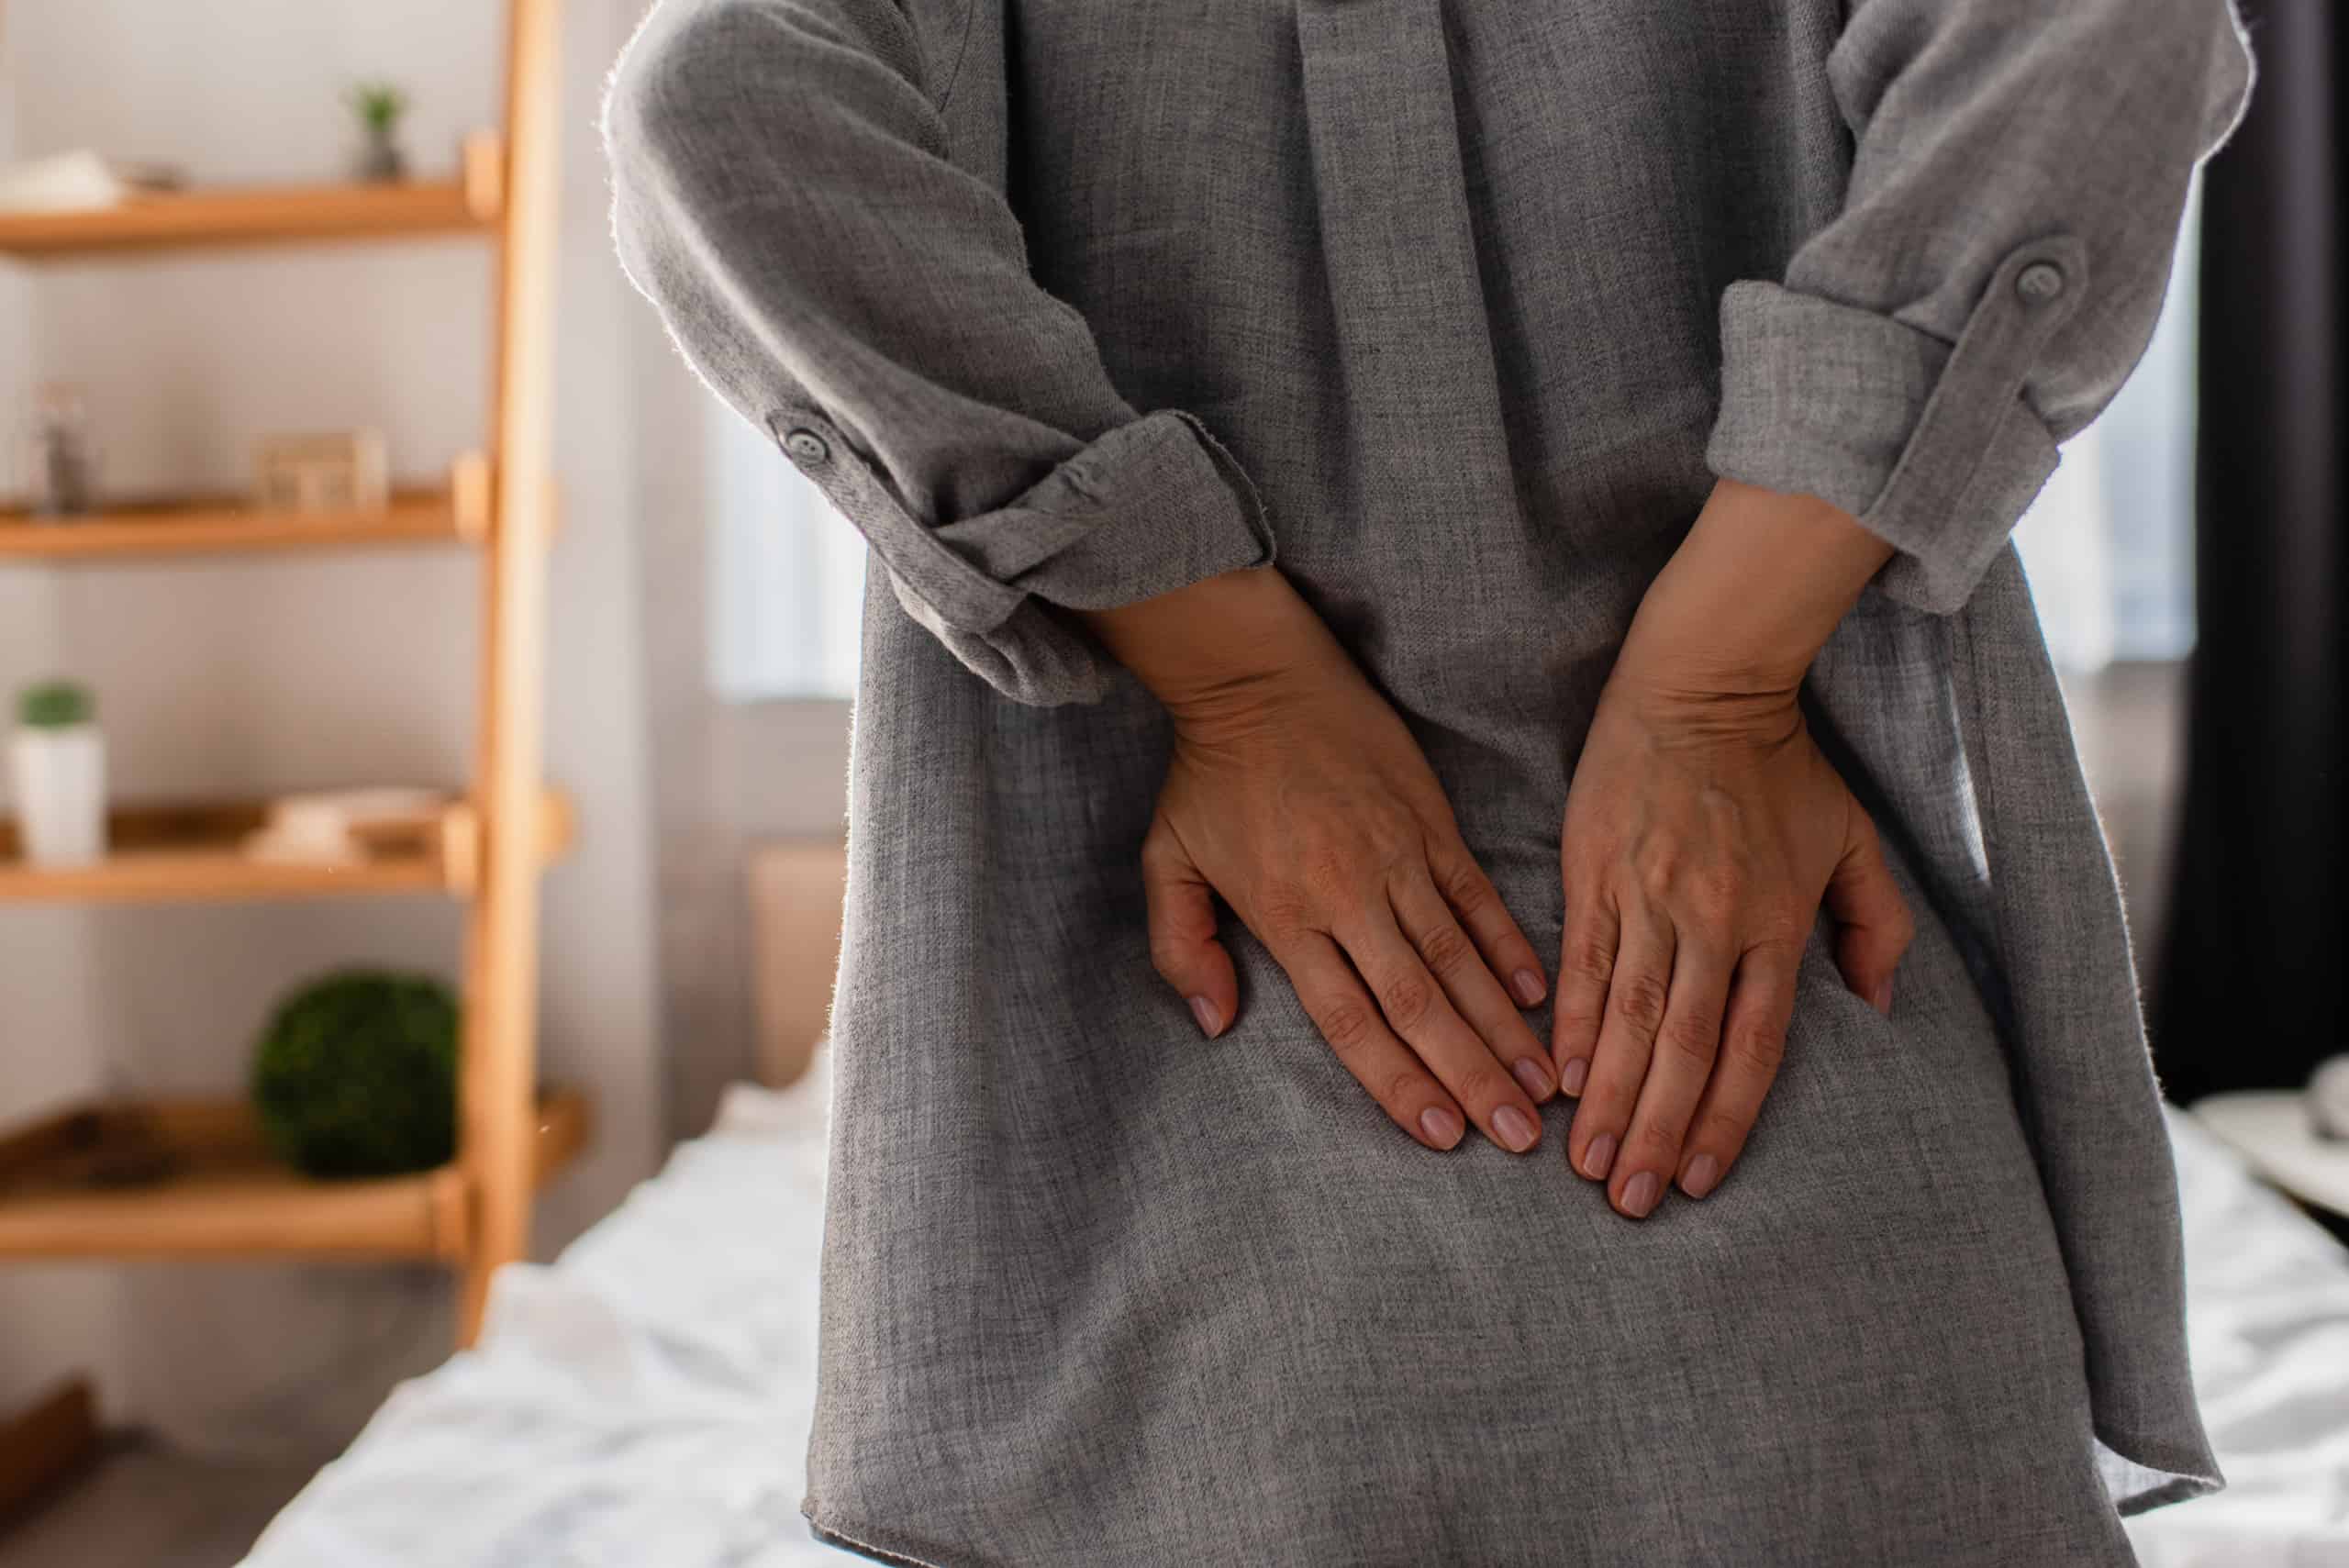 The Importance of Self-Care in Reducing Back Strain